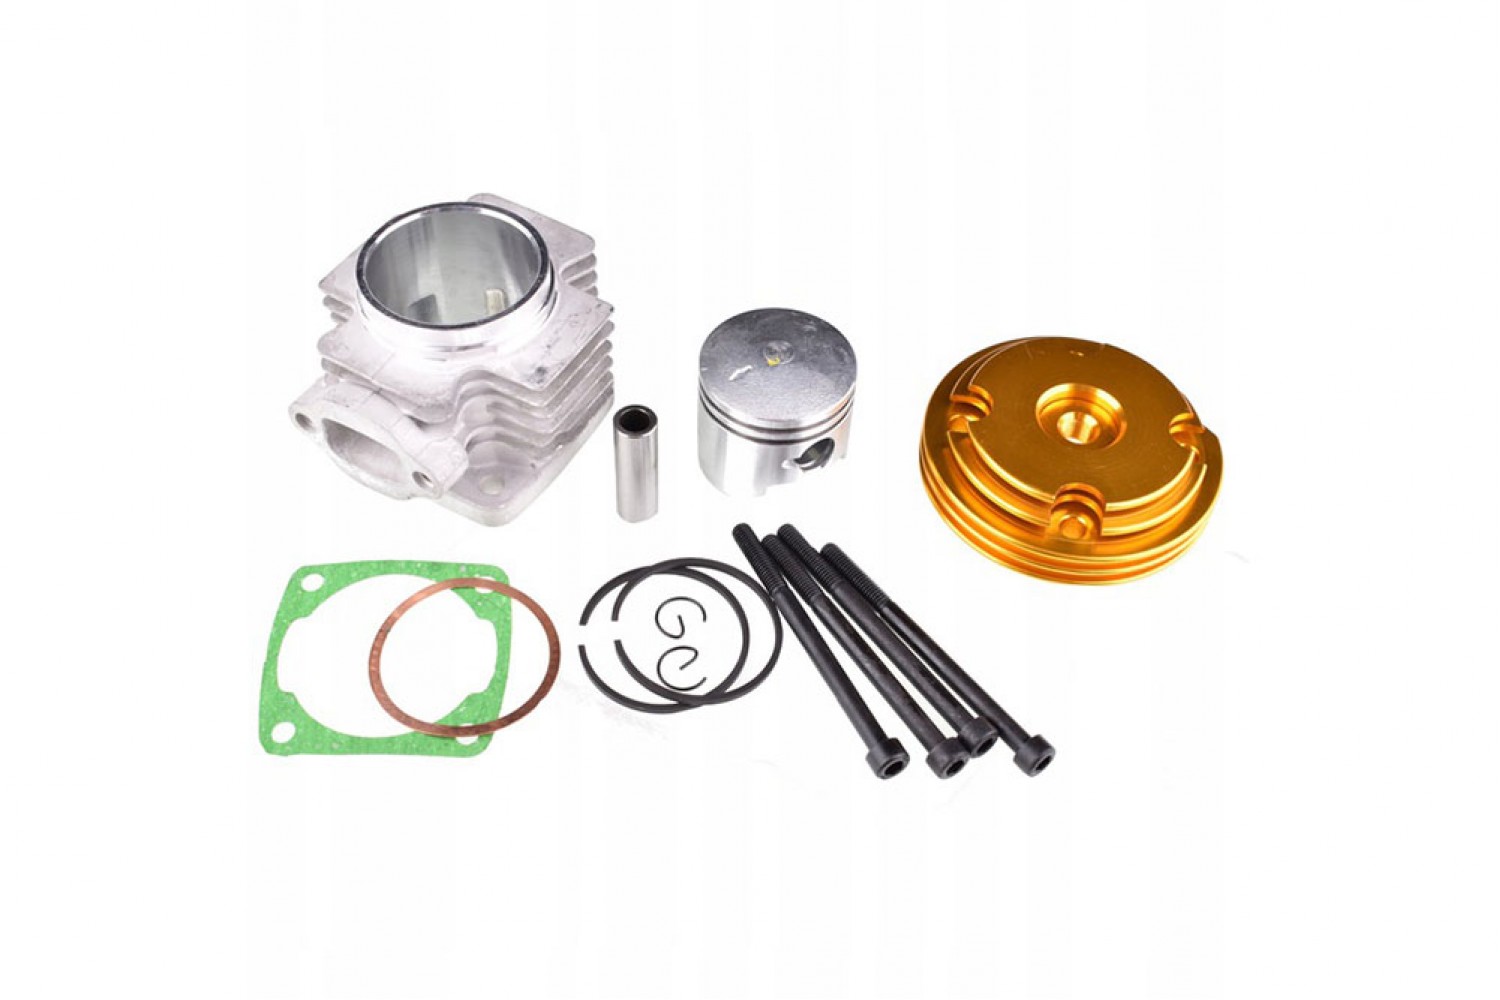 WOOSTAR 44mm Big Bore Cylinder Top End Kit Replacement for 2 Stroke 43cc 47cc 49cc Mini Chinese ATV Quad Pocket Bike Gas Scooter 